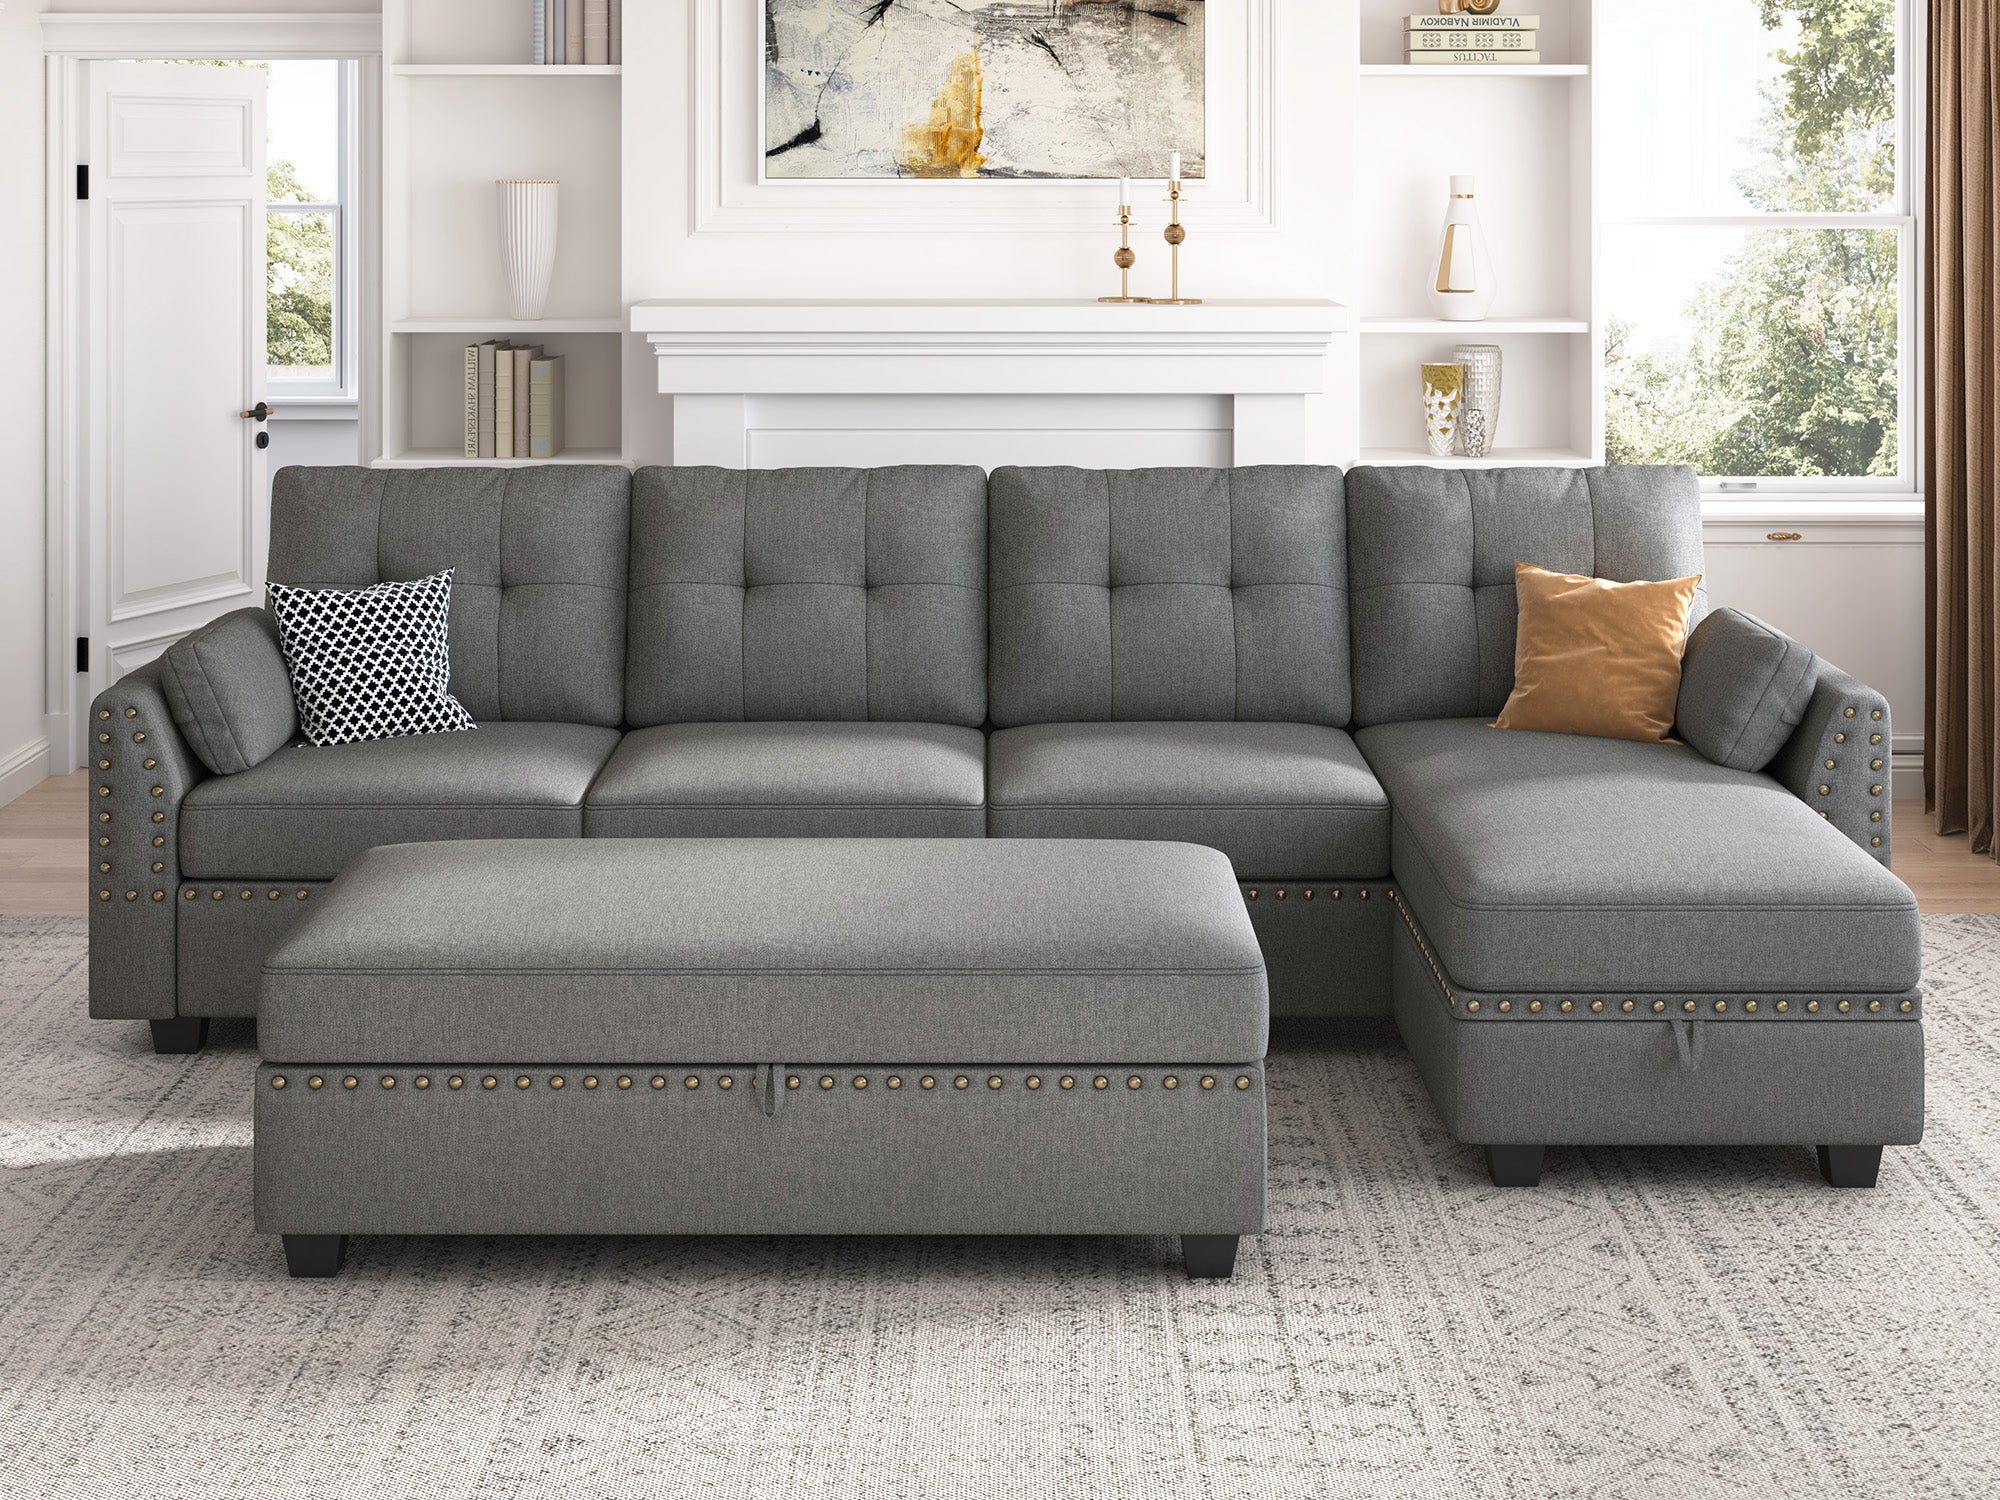 HONBAY 4-Seat L-Shaped Sectional Sofa with Rectangle Storage Ottoman